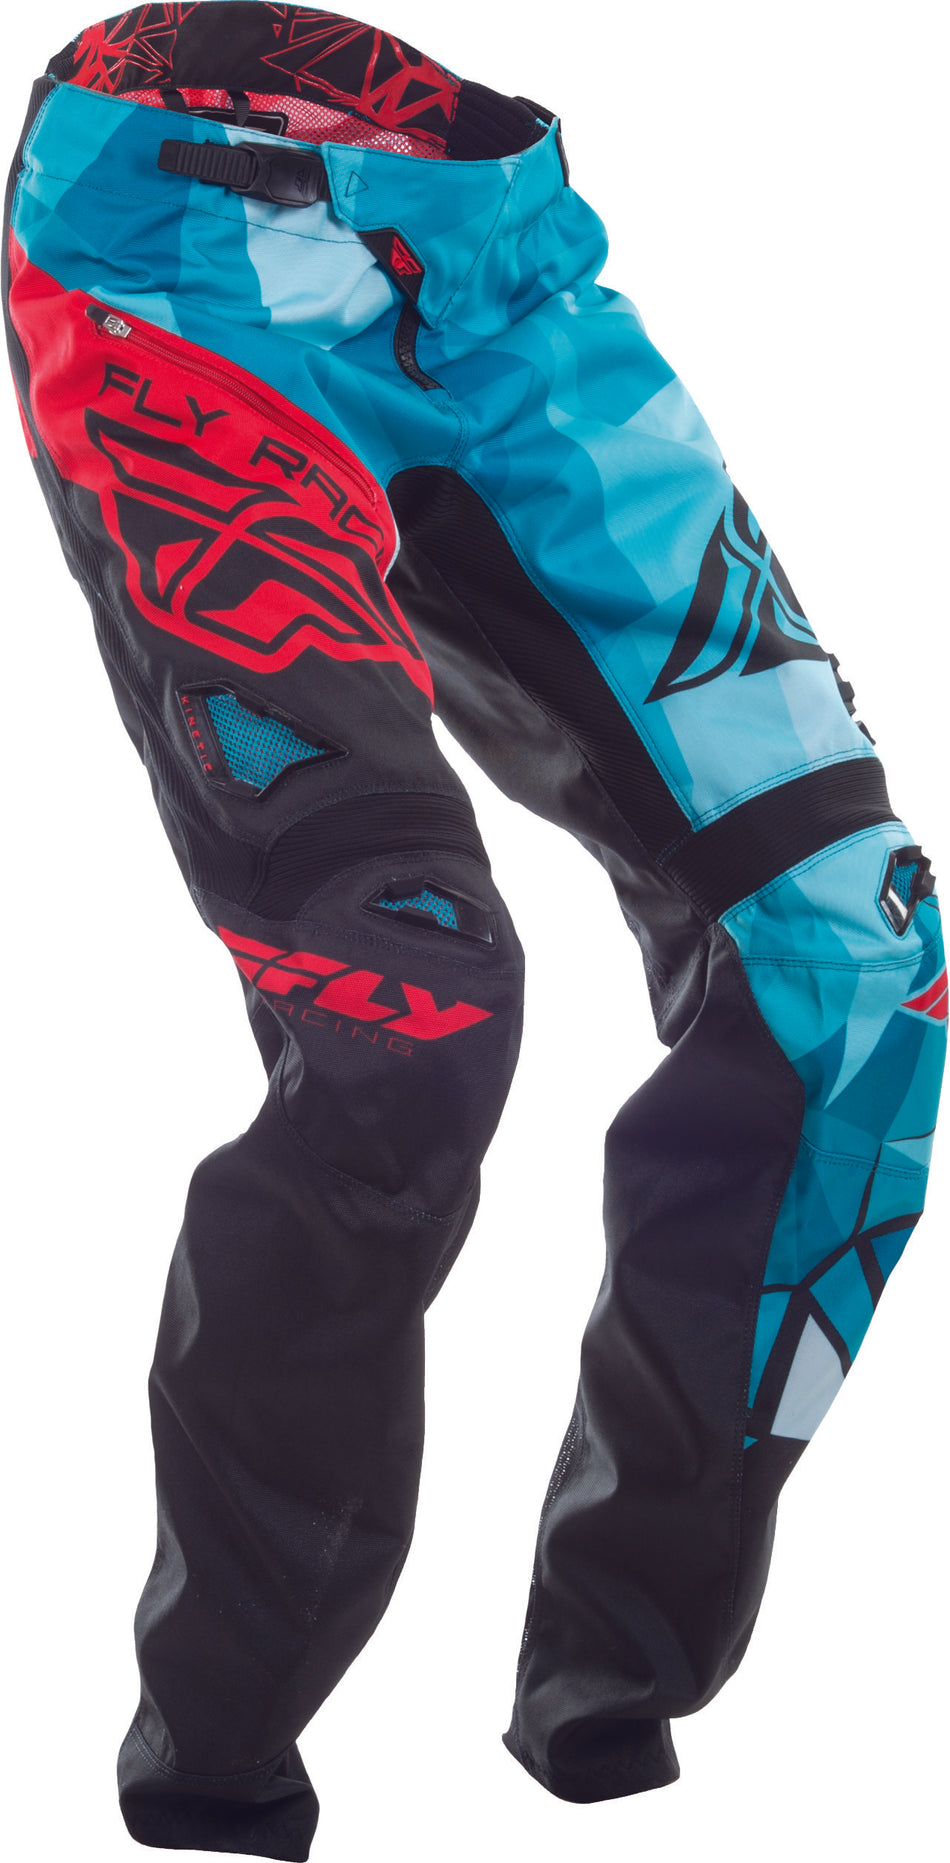 FLY RACING Bicycle Crux Pant Black/Teal/Red Sz 34 370-02934